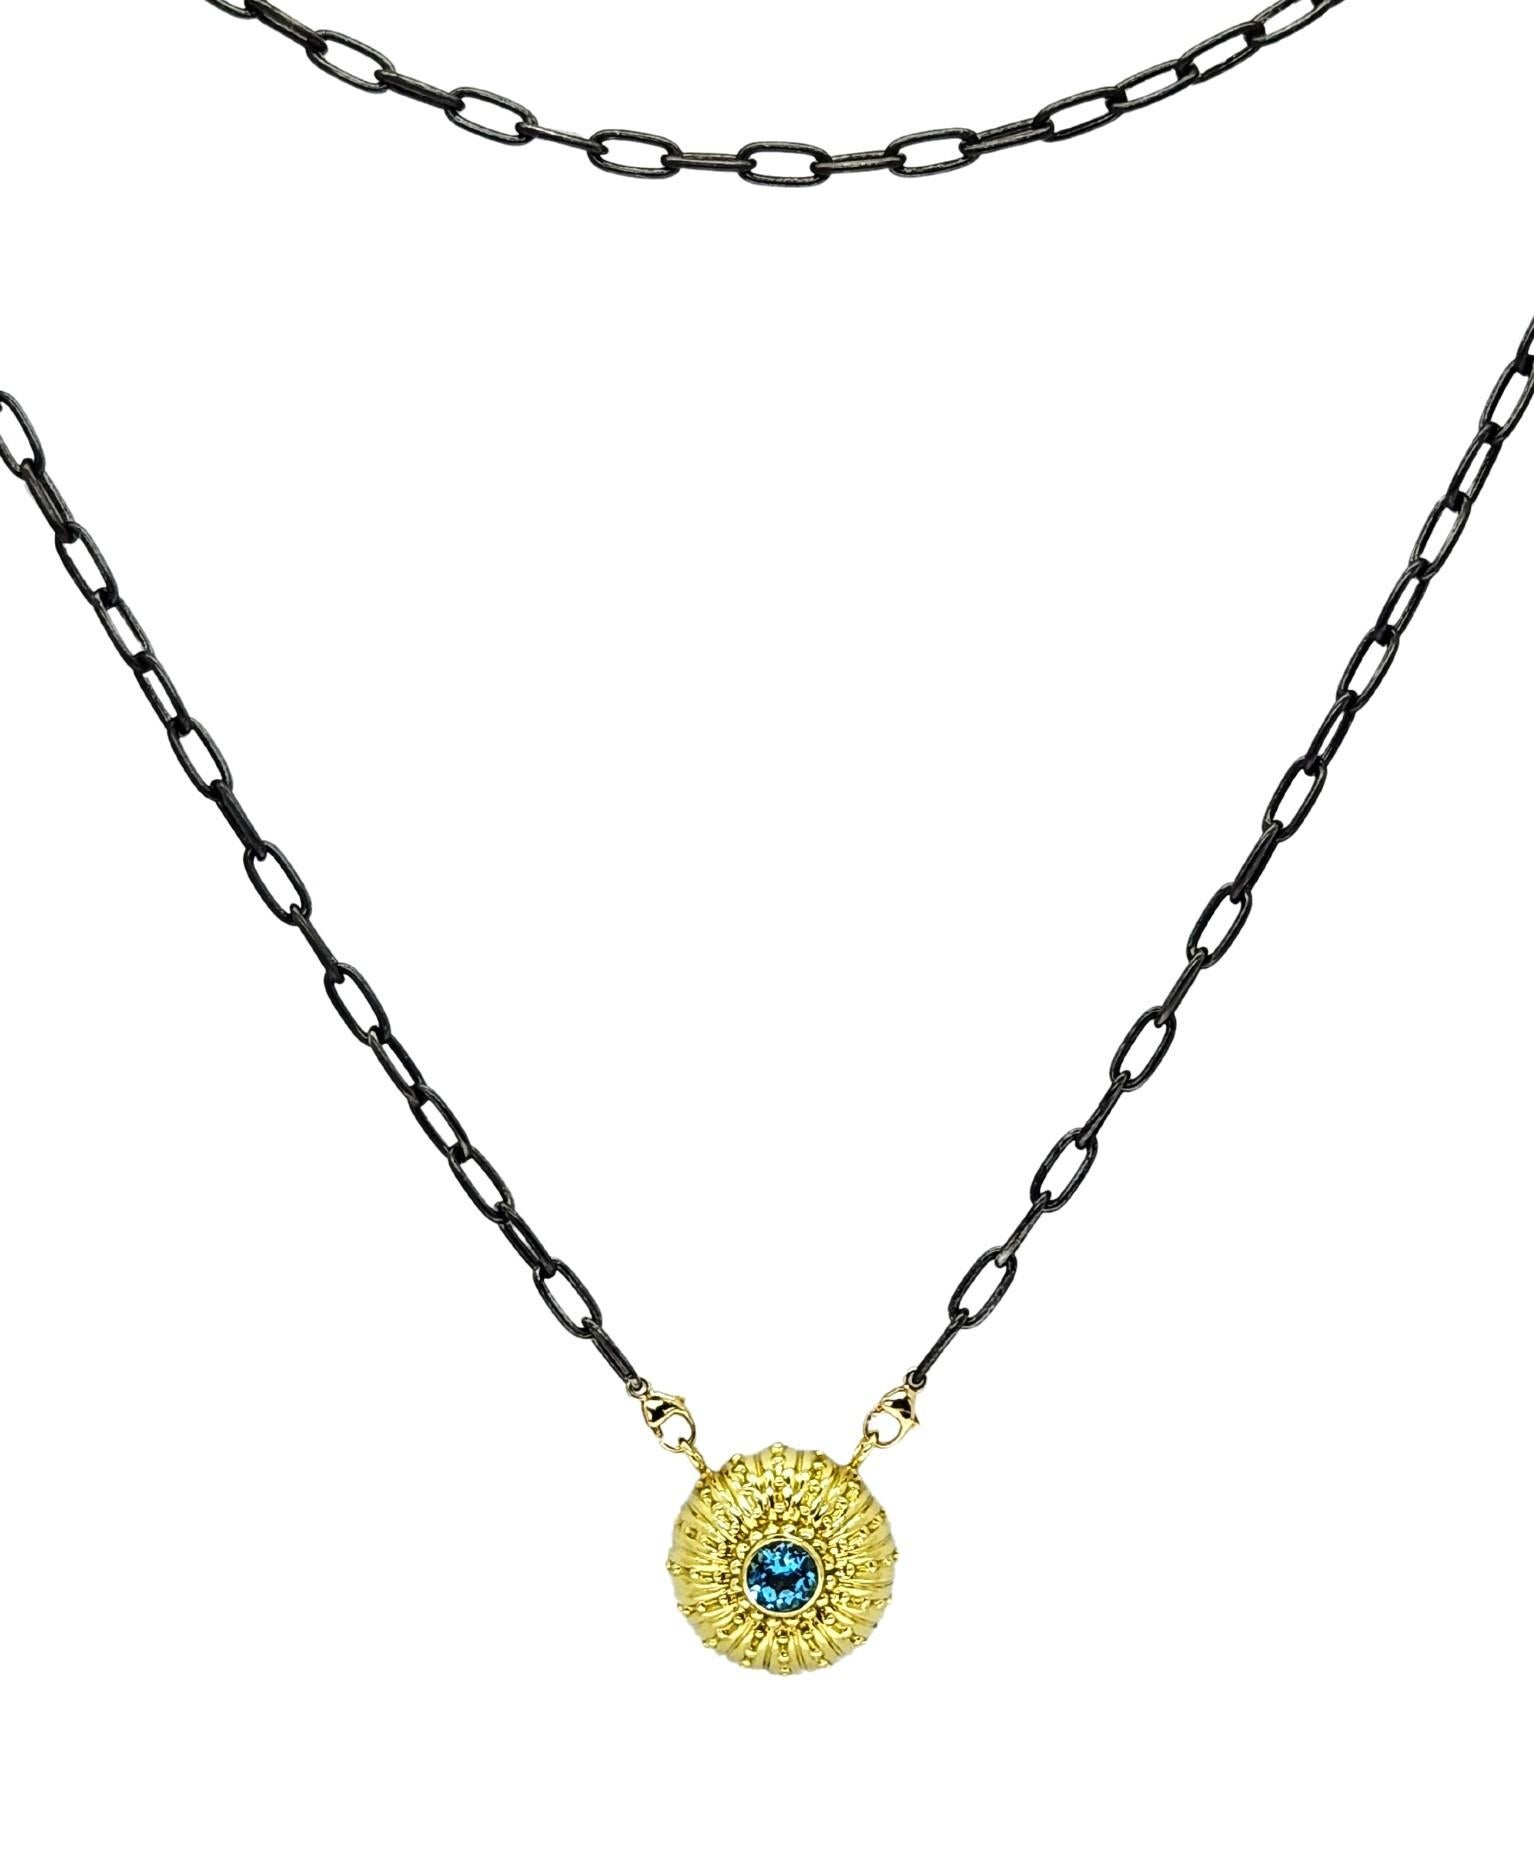 Distinctive and beautiful textured Sea Urchin Necklace in 18K green Gold with a round center 5mm bright Blue Topaz representing the ocean/sea. The unique texture including beading, flutes and high polish make this a feminine style. Perfect for